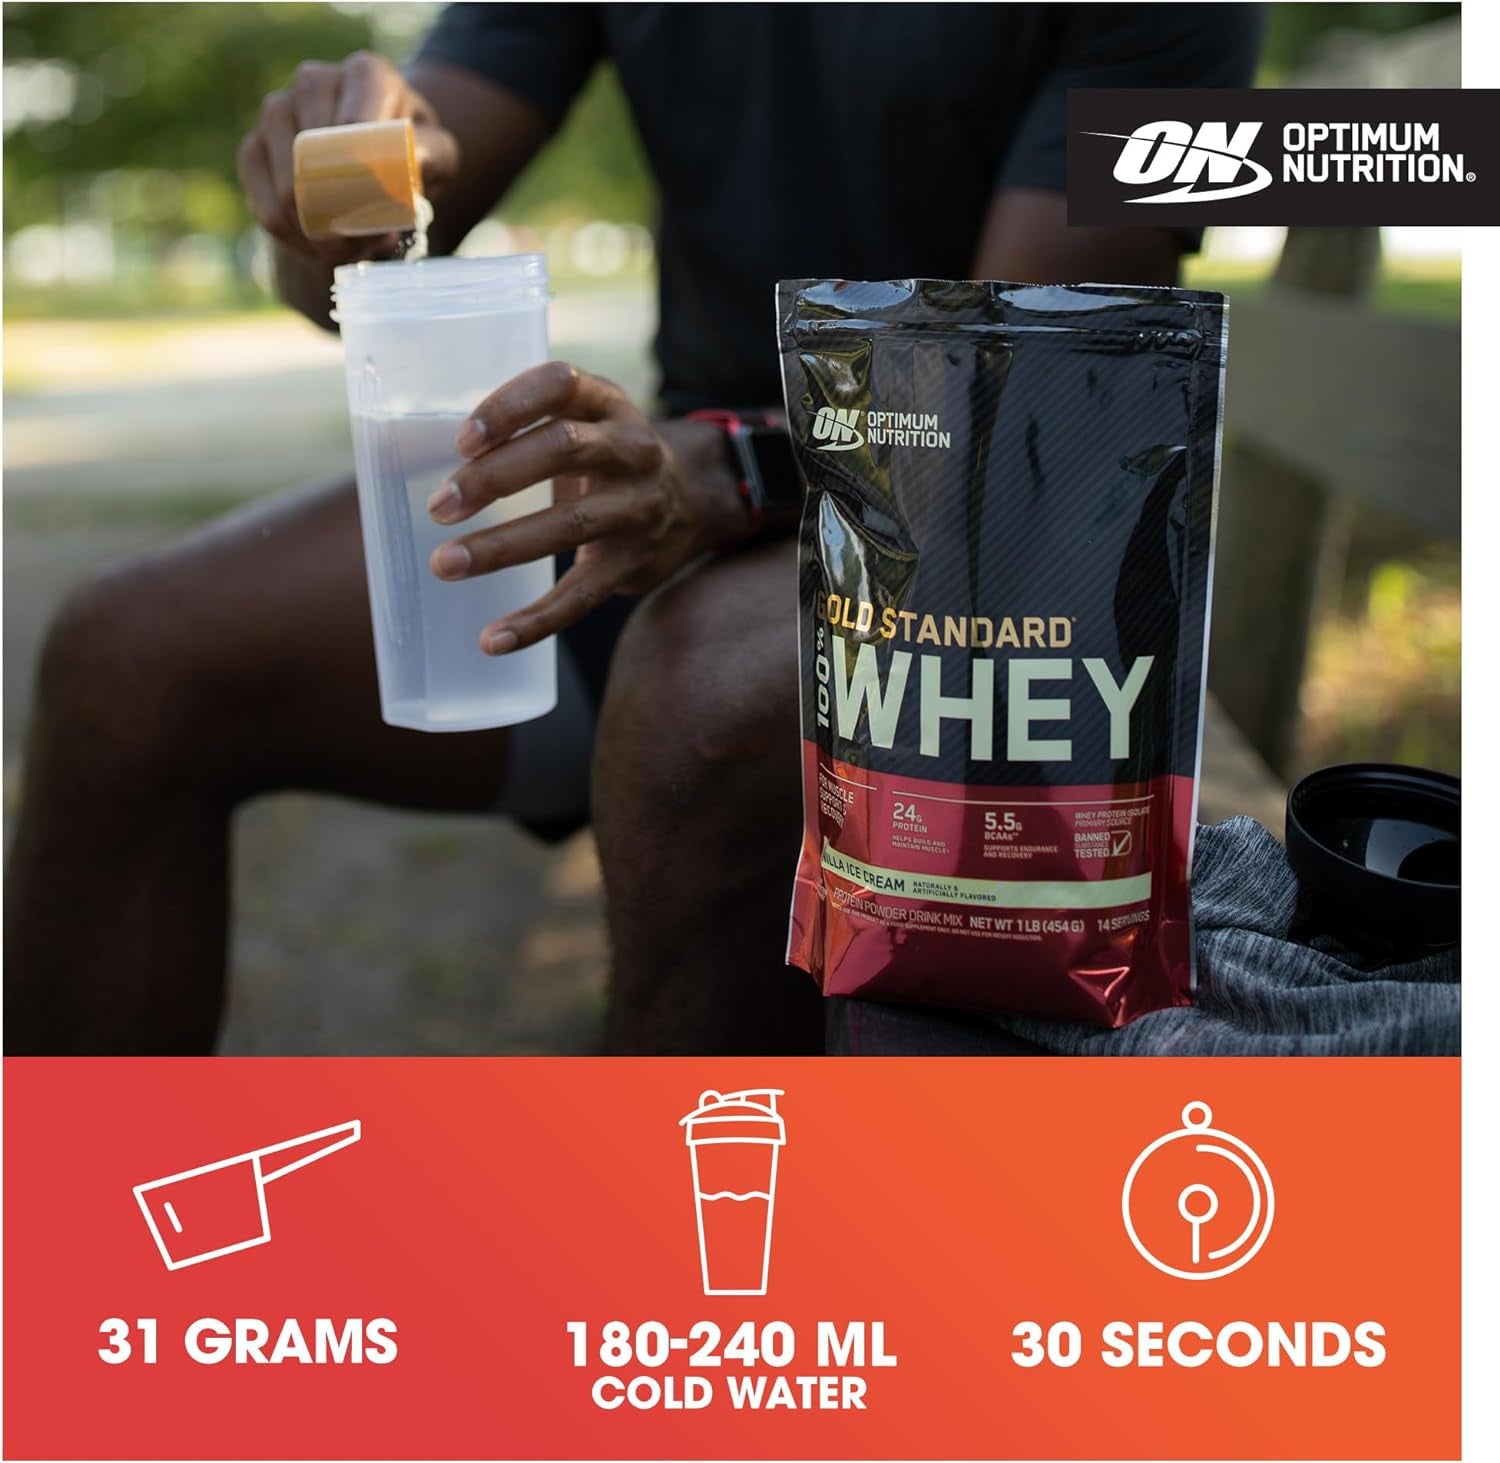 Gold Standard 100% Whey Muscle Building and Recovery Protein Powder with Naturally Occurring Glutamine and BCAA Amino Acids, Vanilla Ice Cream Flavour, 15 Servings, 450 G